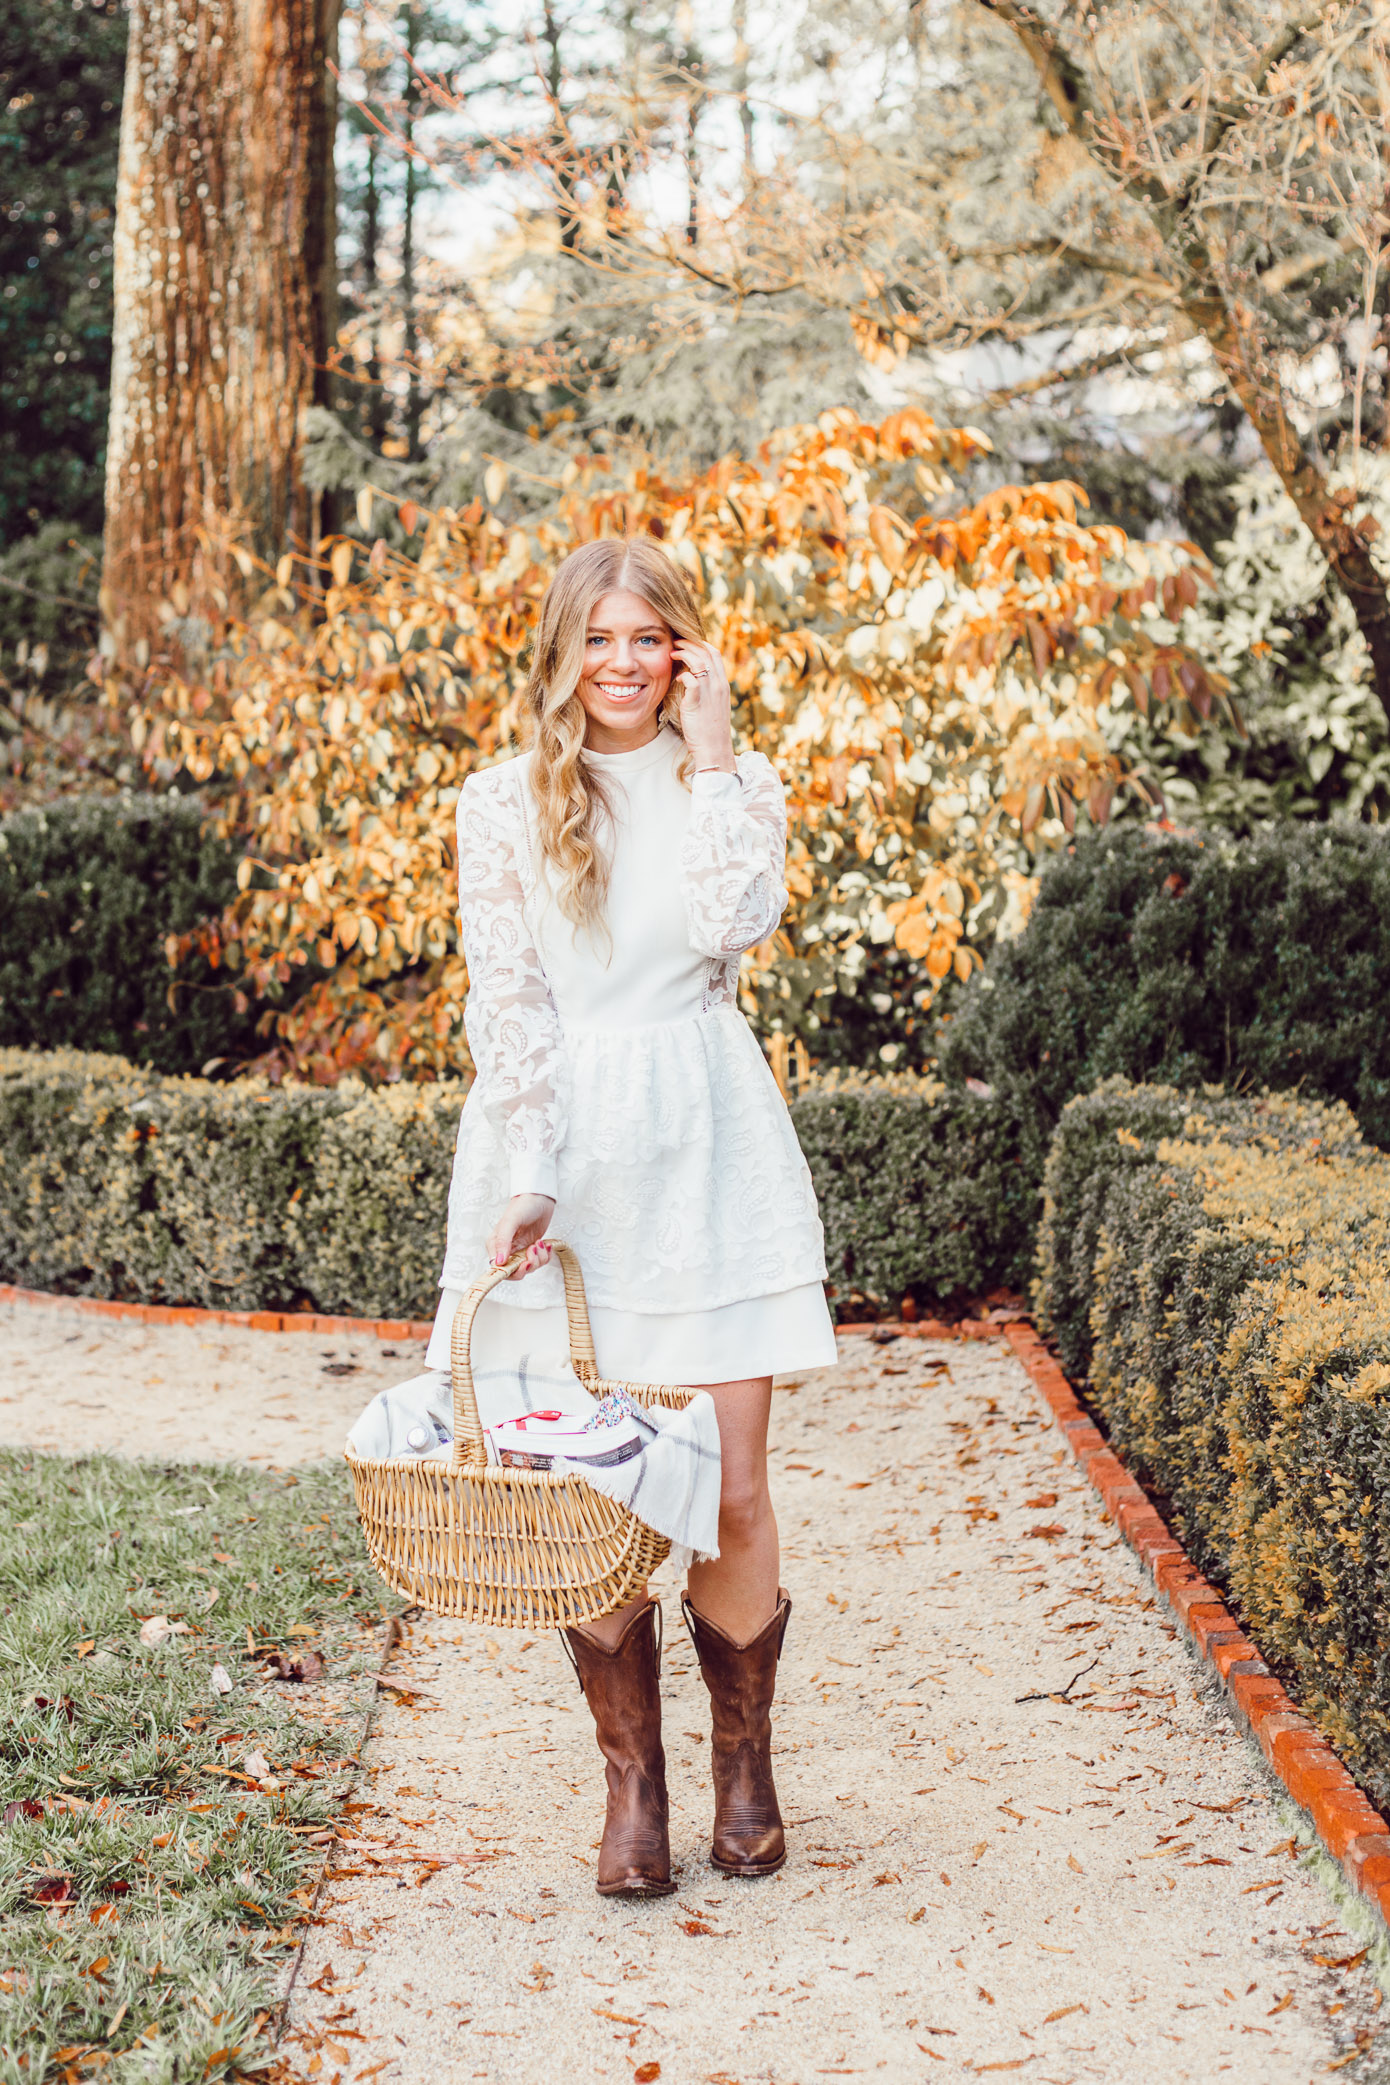 White Mini Dress | How To Celebrate Special Occasions the Right Way With The BEST Small Personal Wine Bottles- Louella Reese